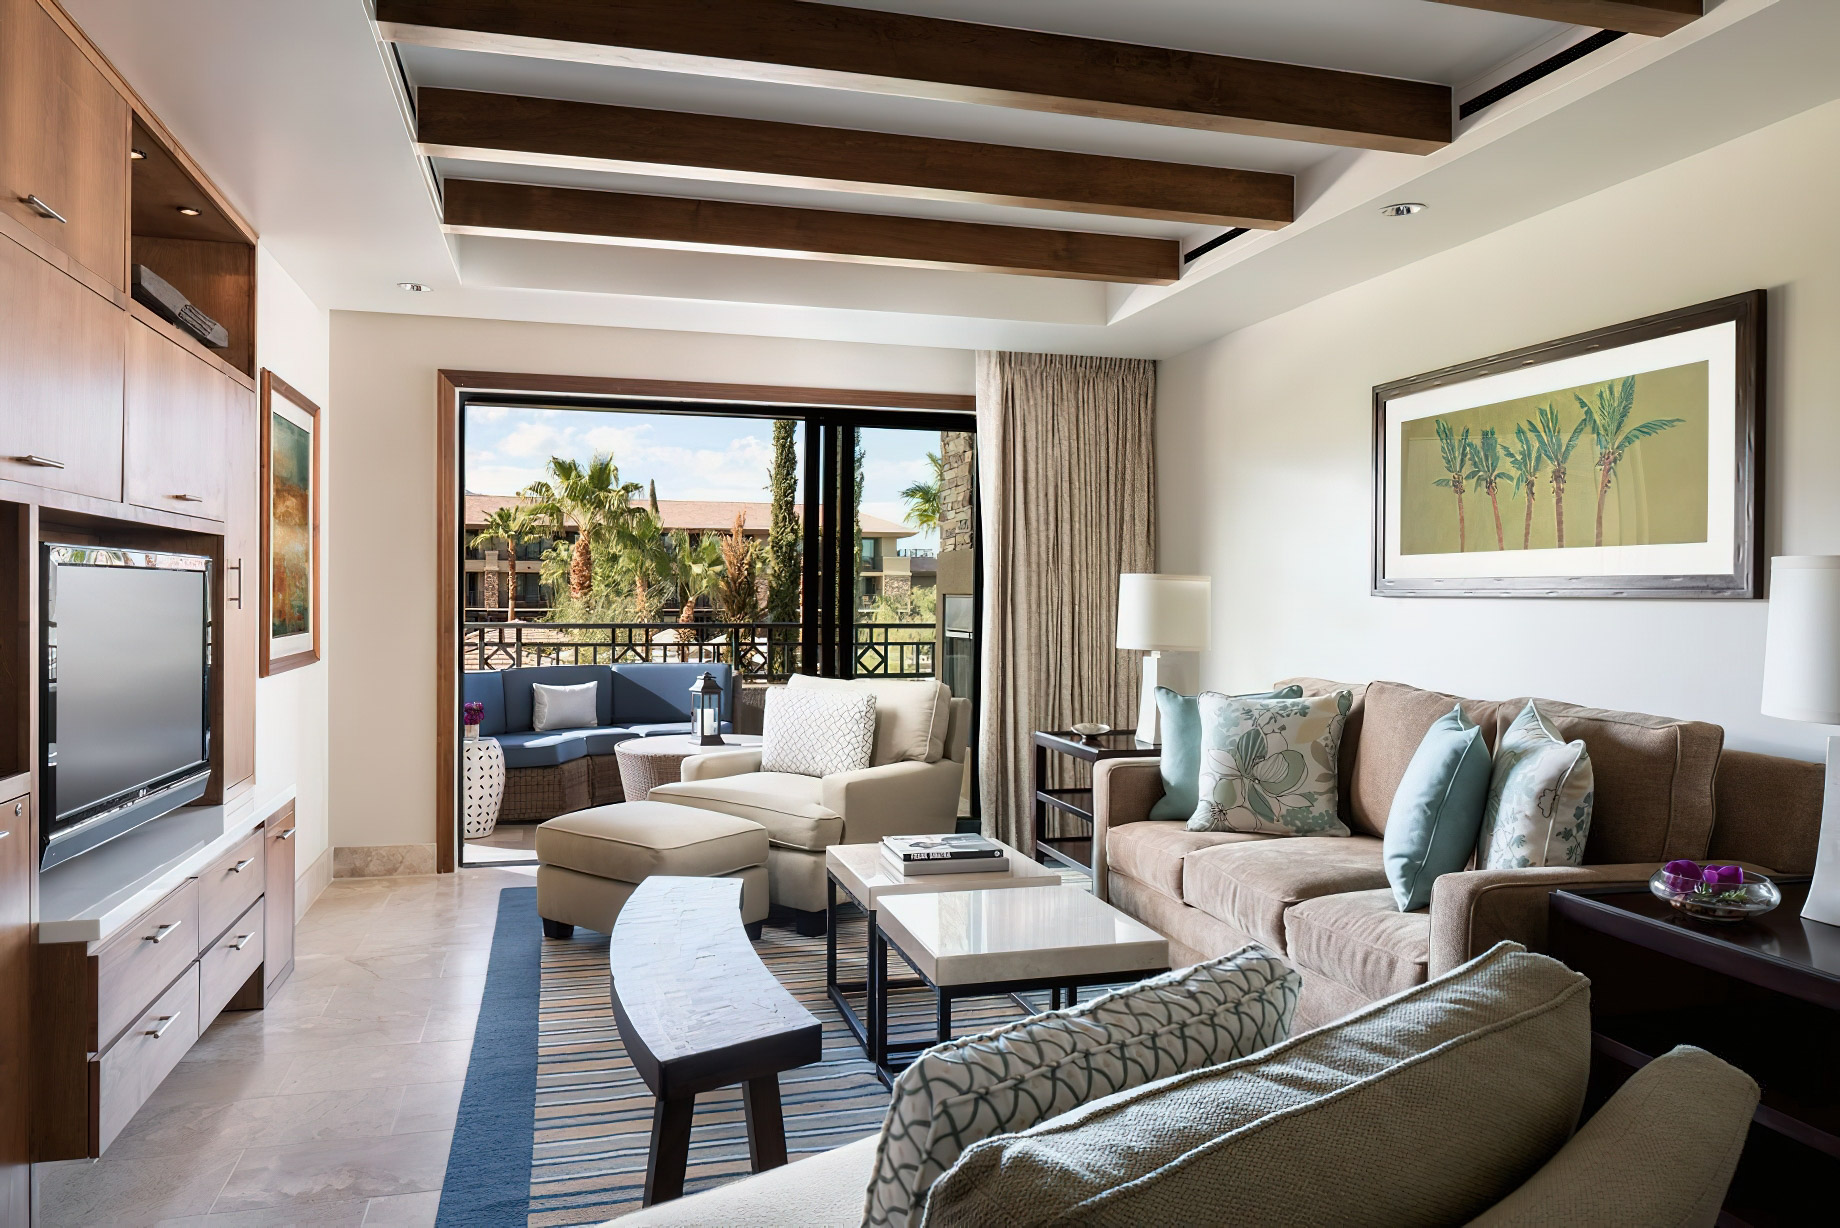 The Ritz-Carlton, Rancho Mirage Resort - Rancho Mirage, CA, USA - One Bedroom Residential Suite